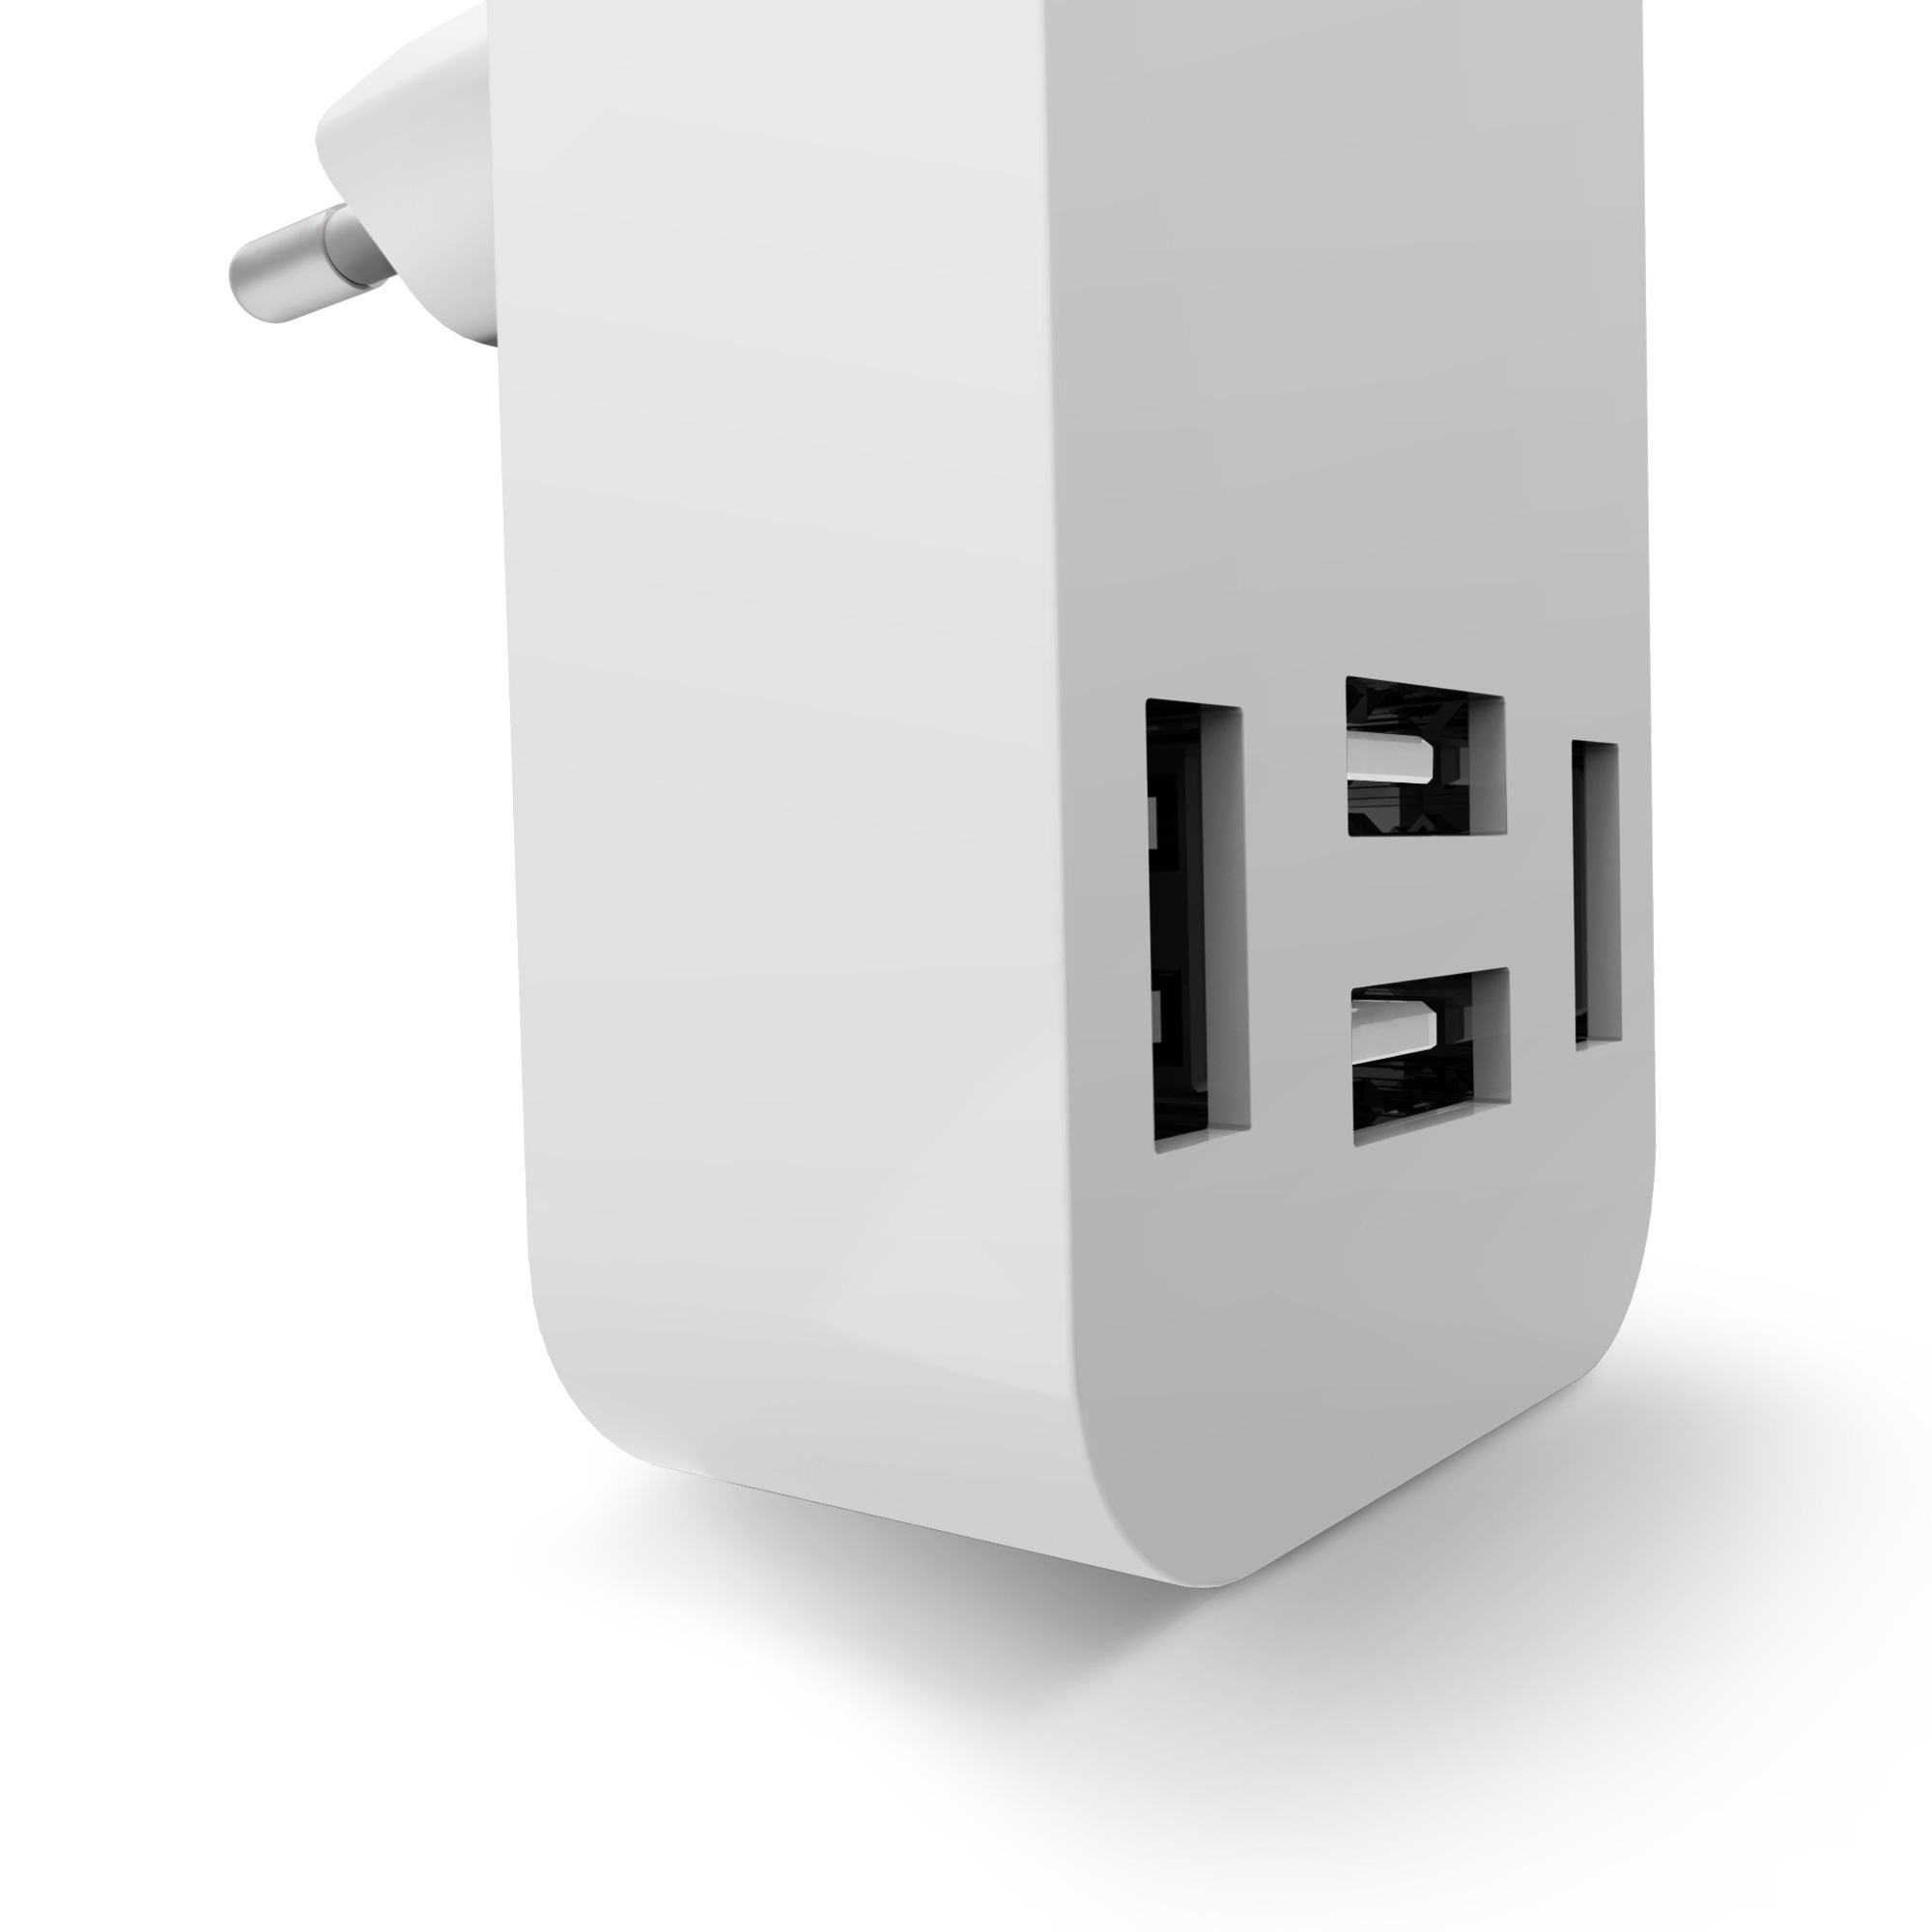 Wall charger with four USB charging ports.